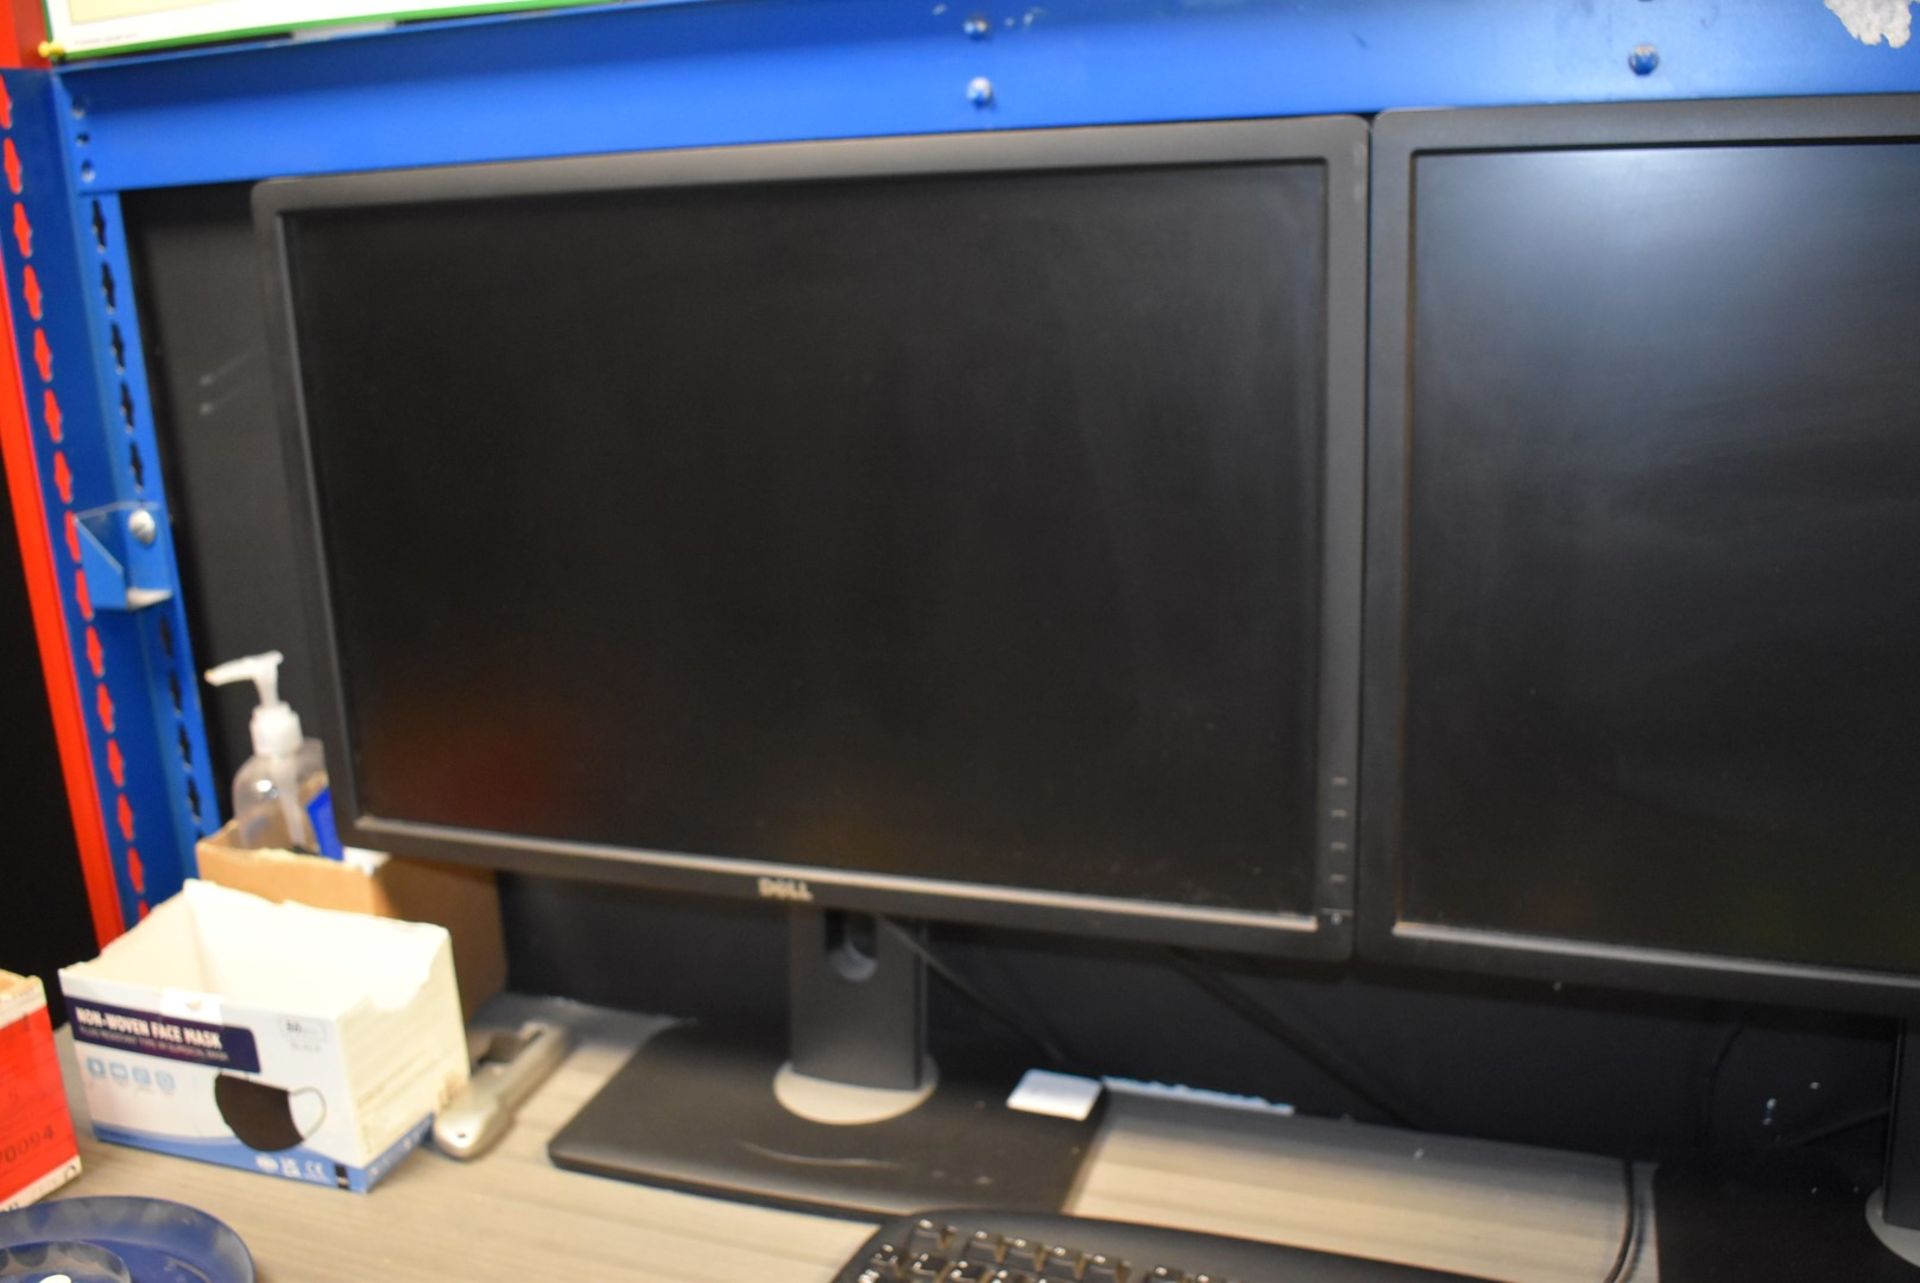 2 x Dell 24 Inch Flatscreen Monitors - Model U2412M - Includes Power Cables and VGA Leads - Image 3 of 6